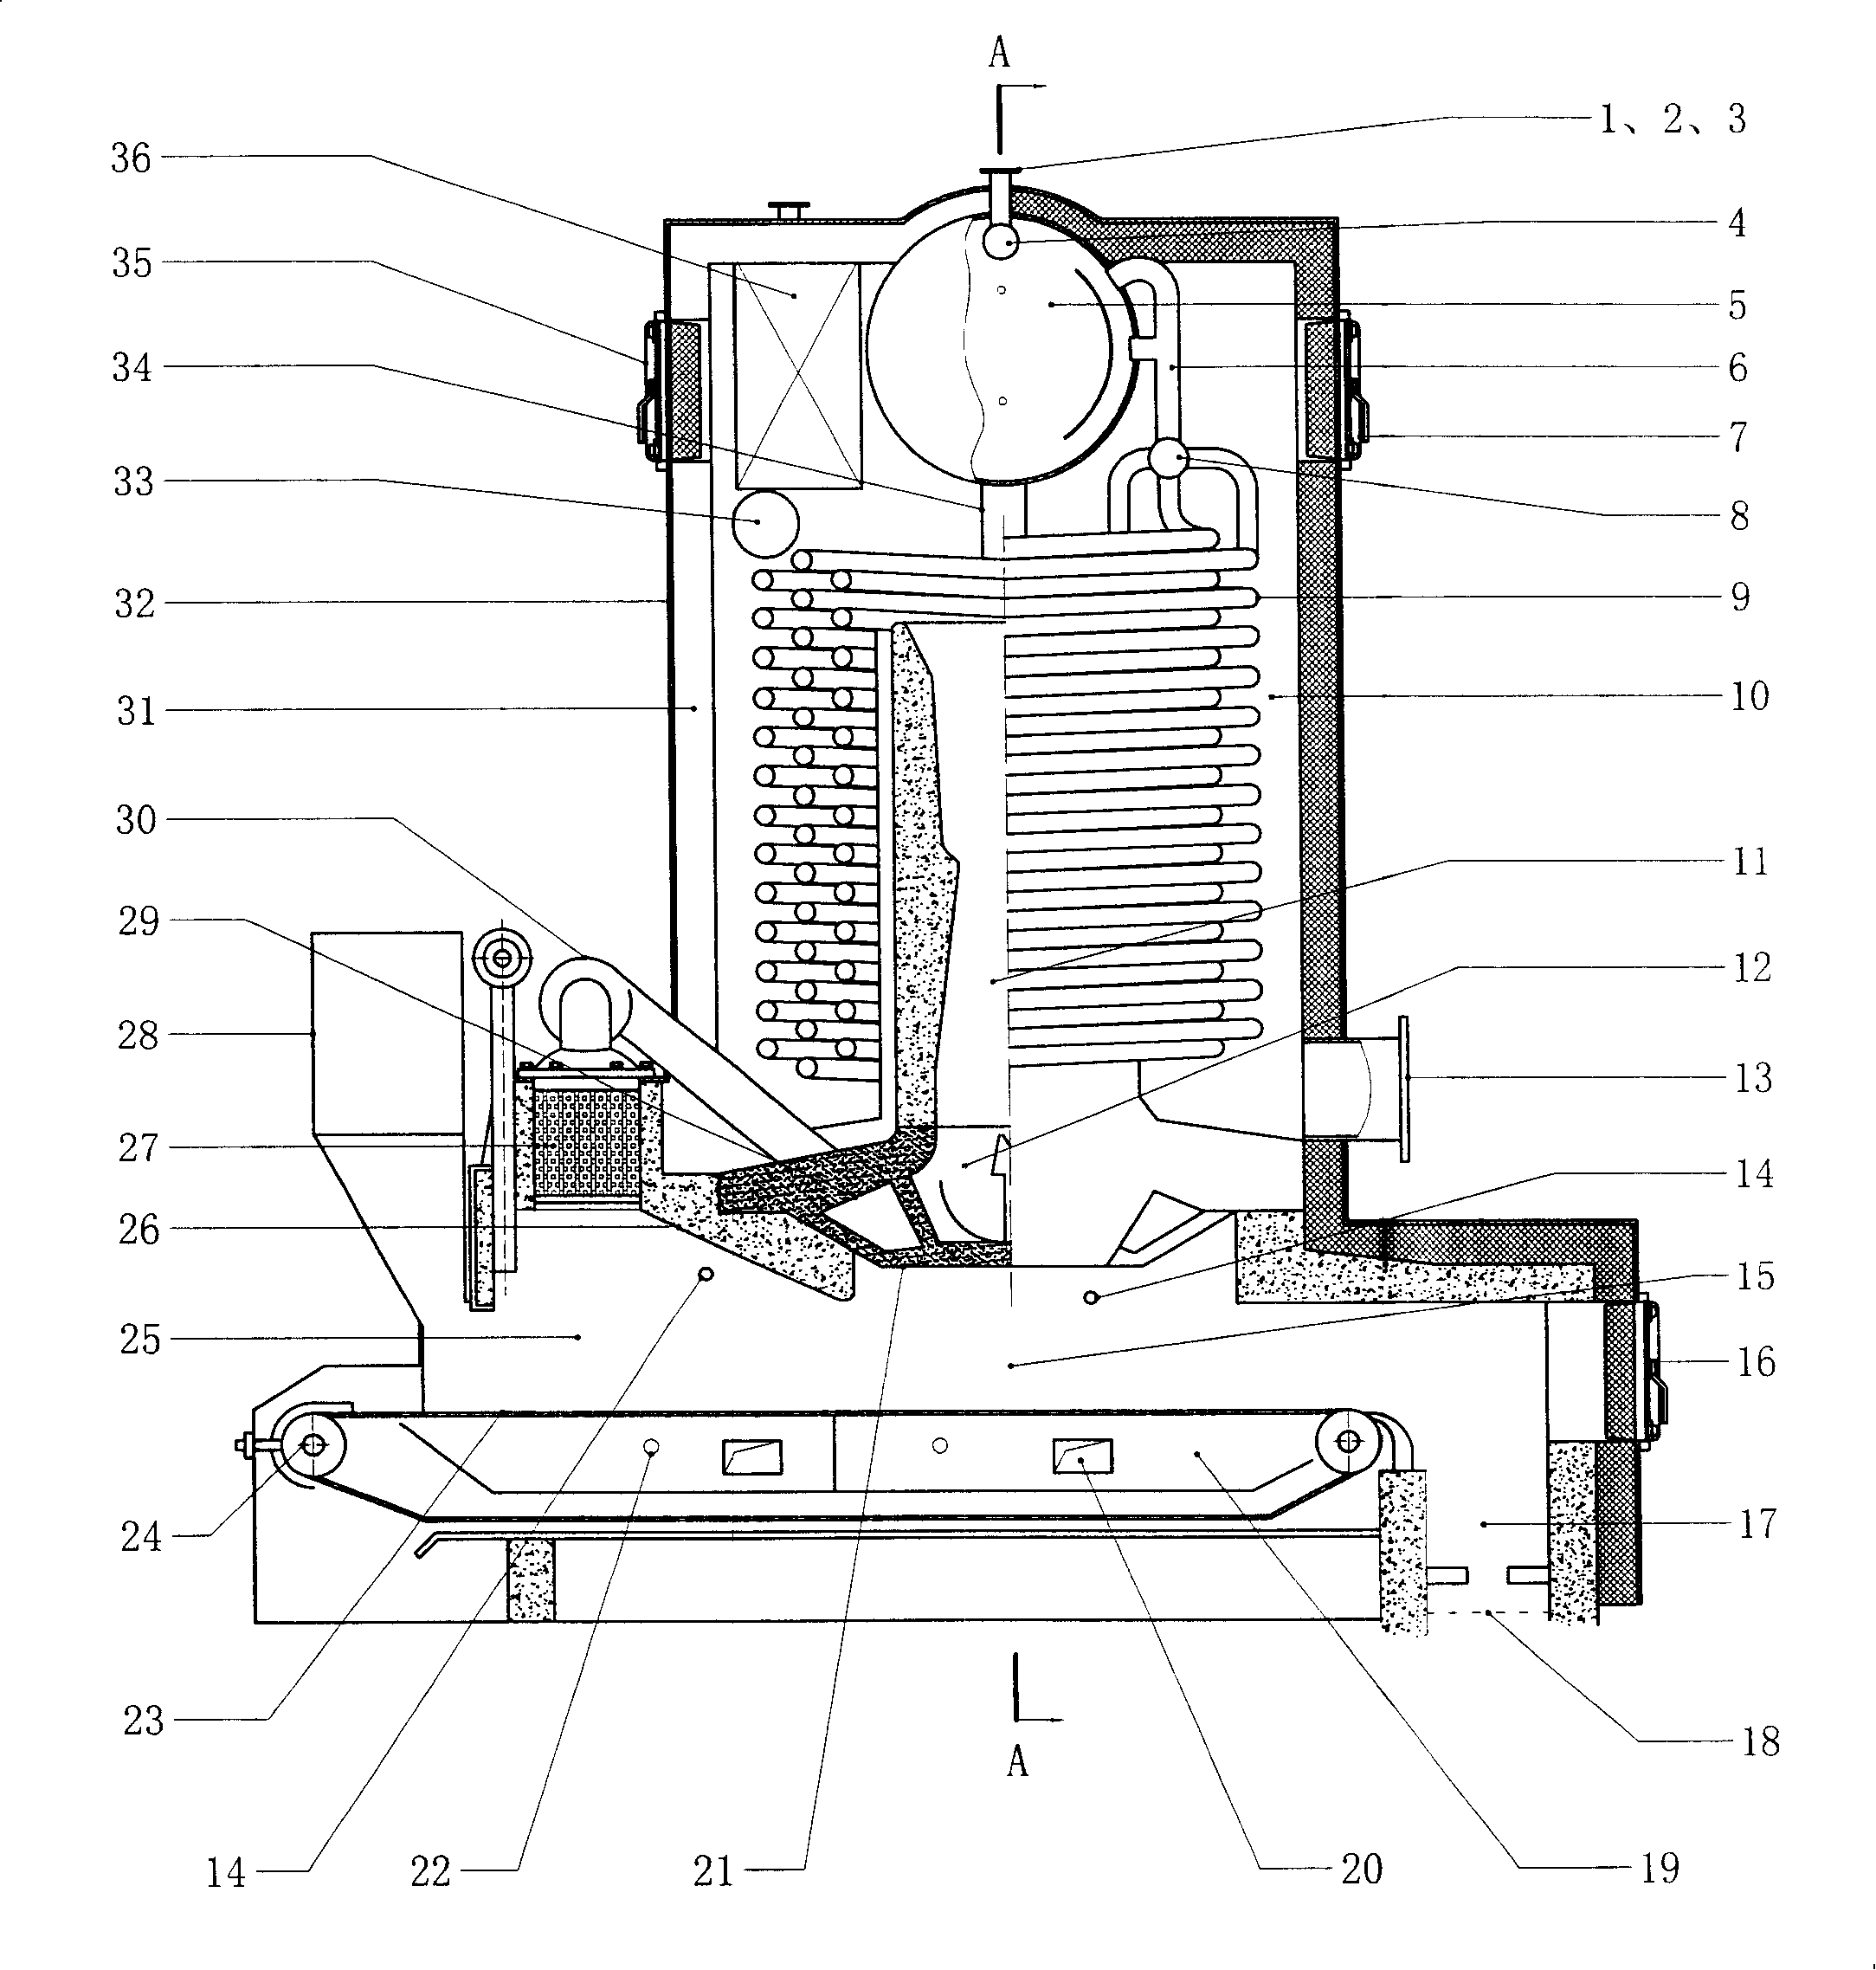 Dynamics gasification furnace and exhaust heat boiler composed by the same